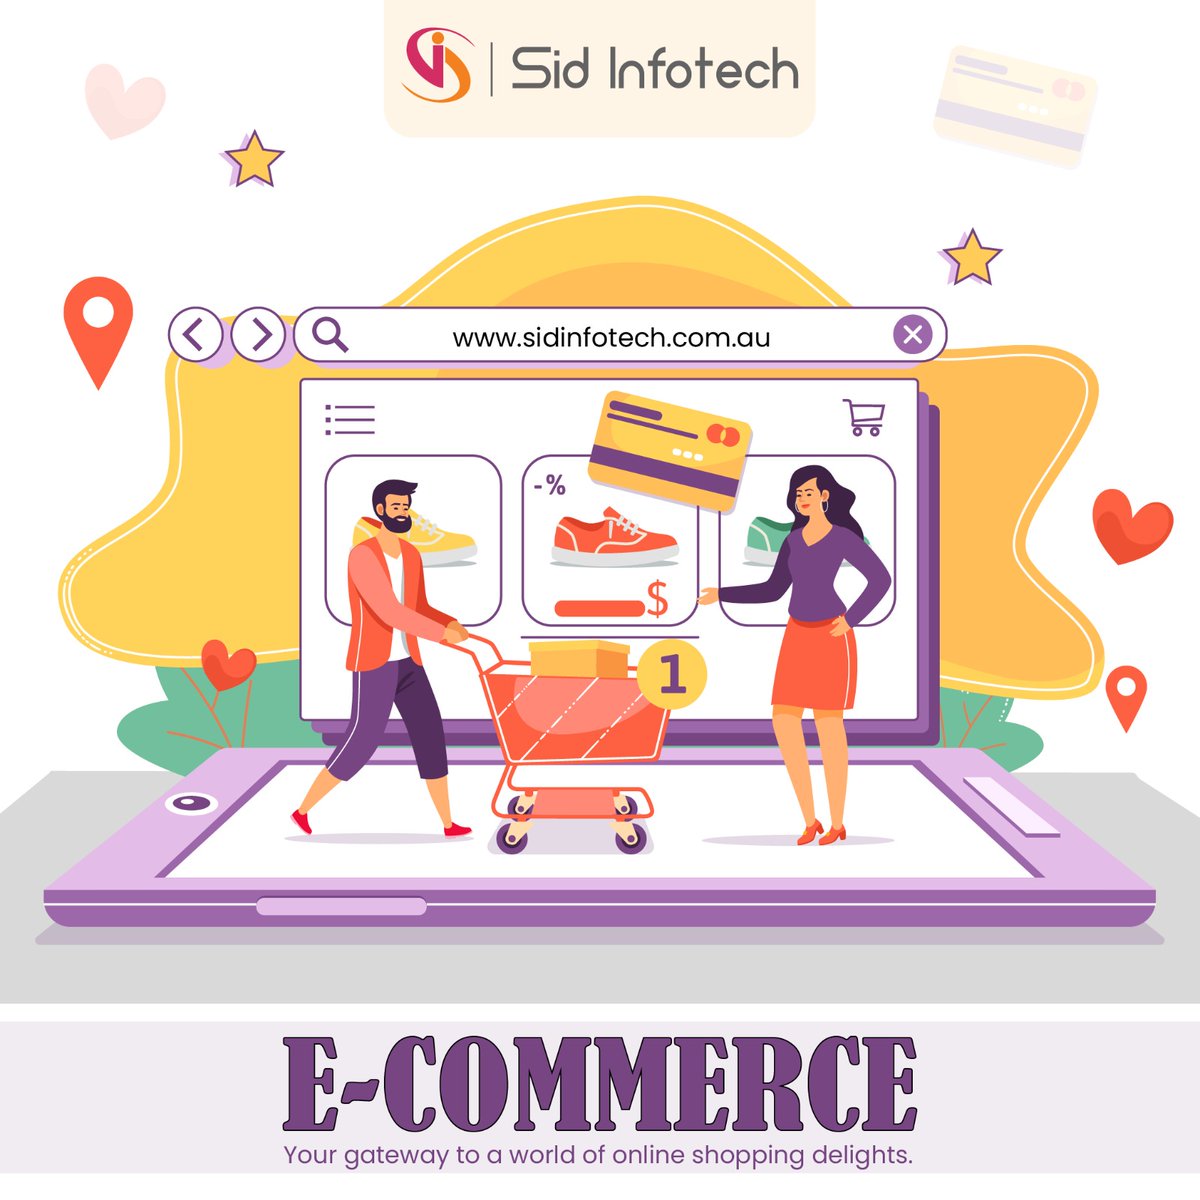 Looking for a way to improve your e-commerce site? We have the experience, expertise and tools to help you get there.
.
.
#ecomercebusiness #sidinfotech #ecommerceservices